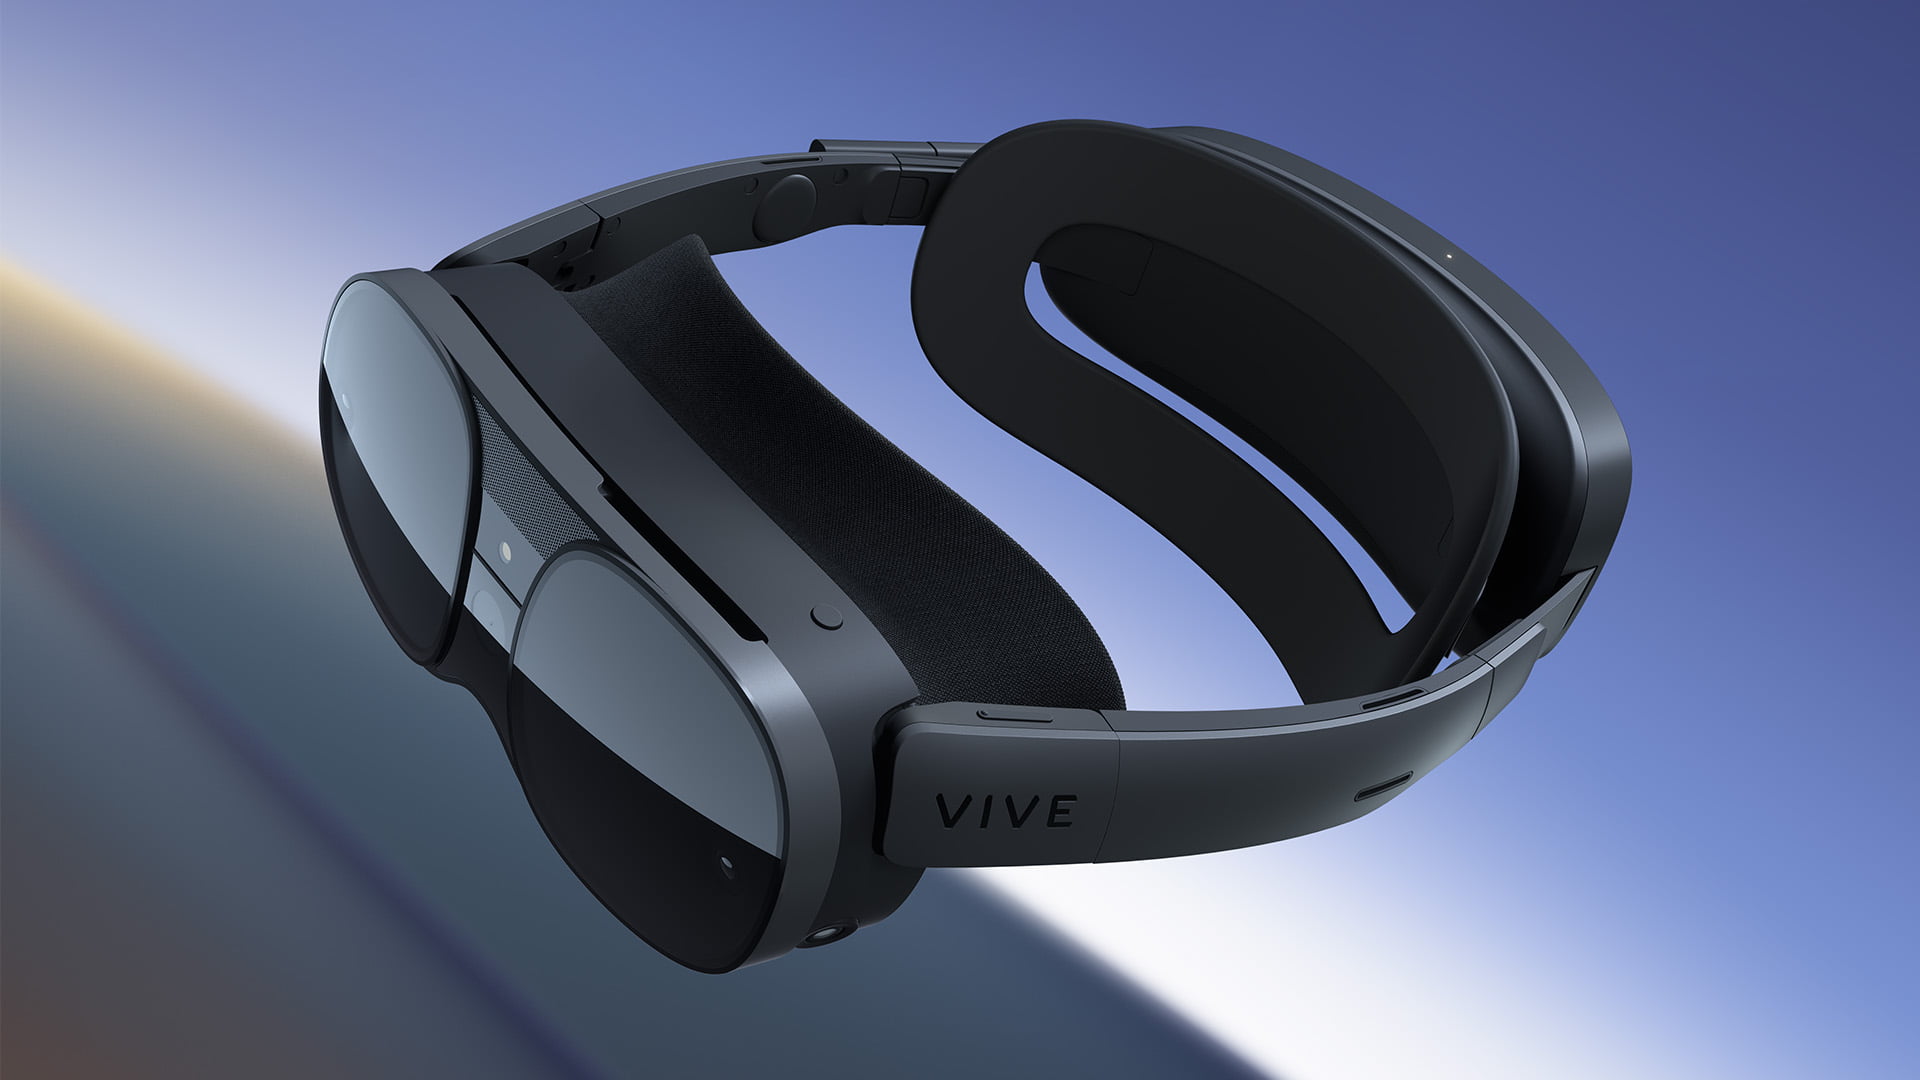 Vive XR Elite hands-on: A truly elite headset, but for whom?